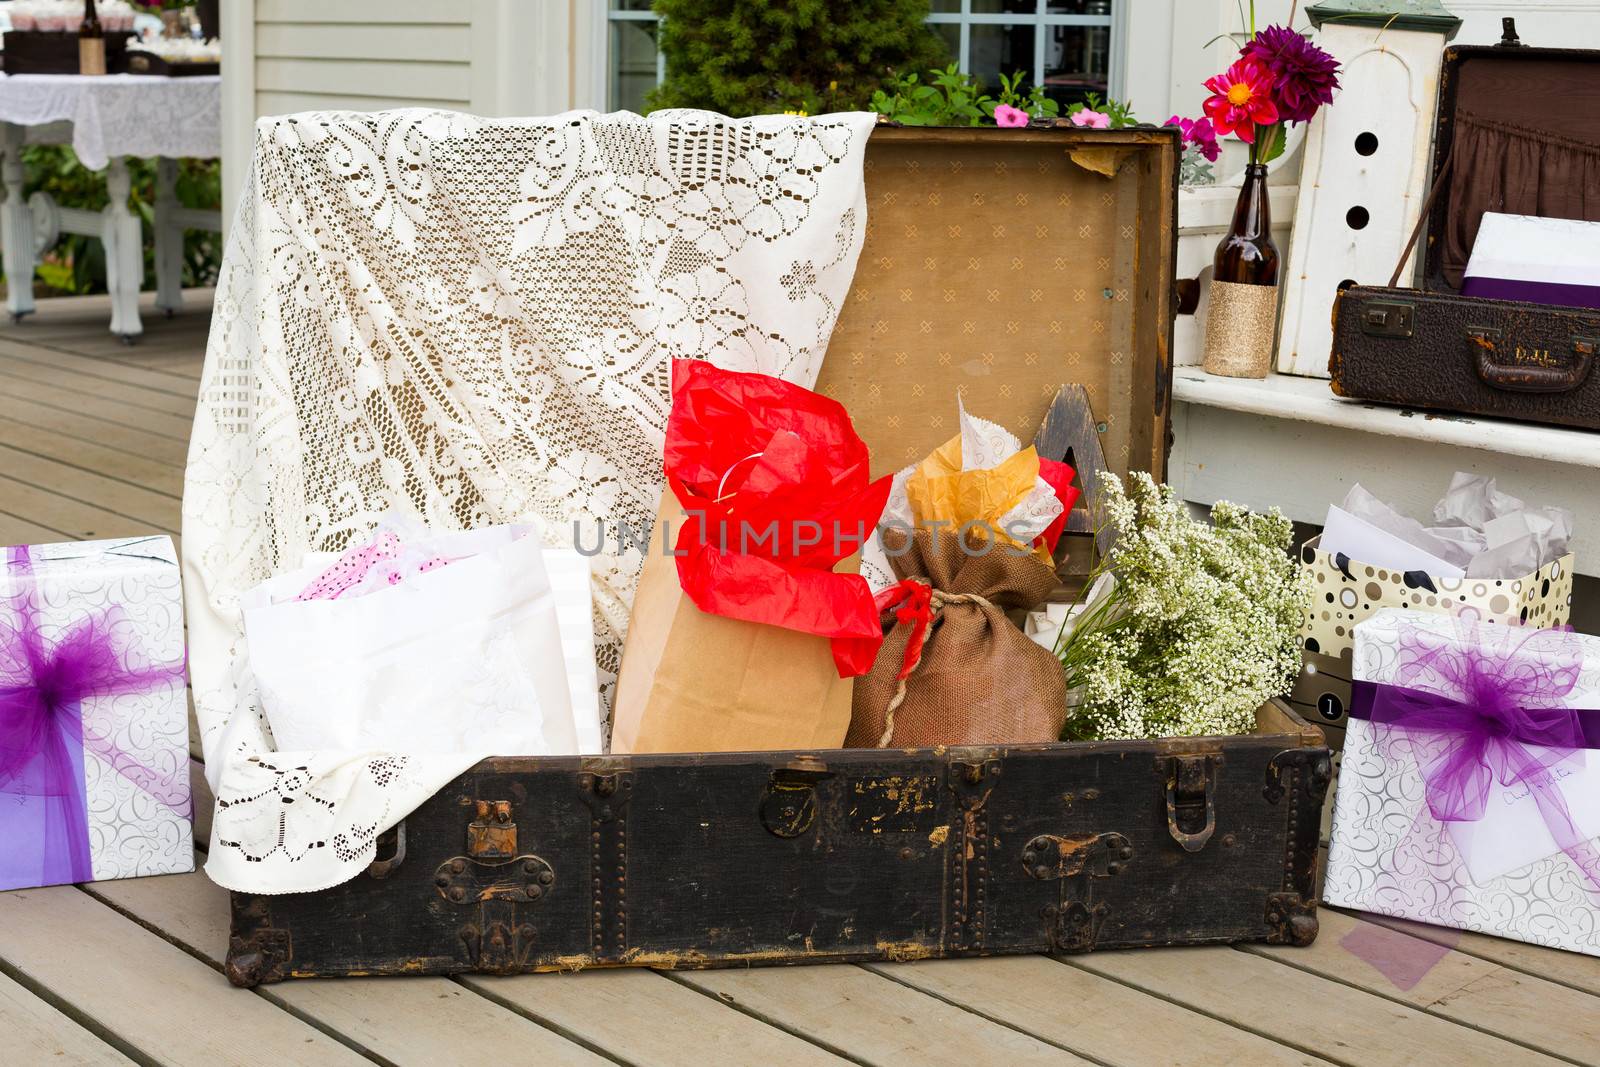 Wedding ceremony gifts are placed in this suitcase outdoors at a summer wedding with the theme rustic country chic.